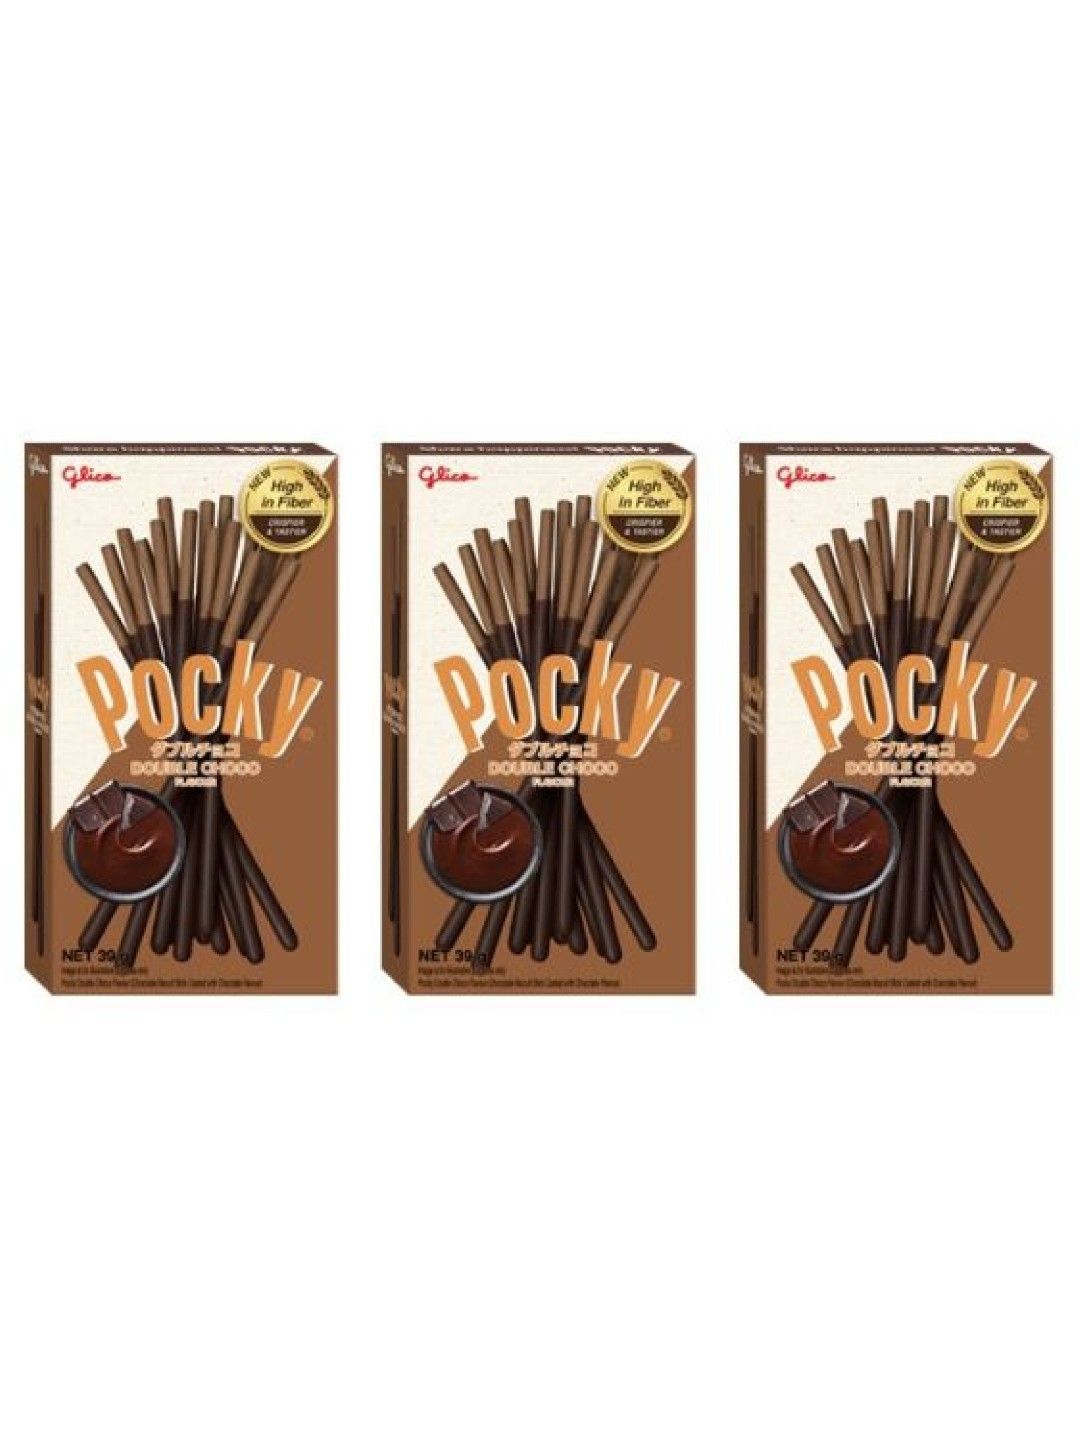 Pocky Double Choco Biscuit Sticks (Bundle of 3)